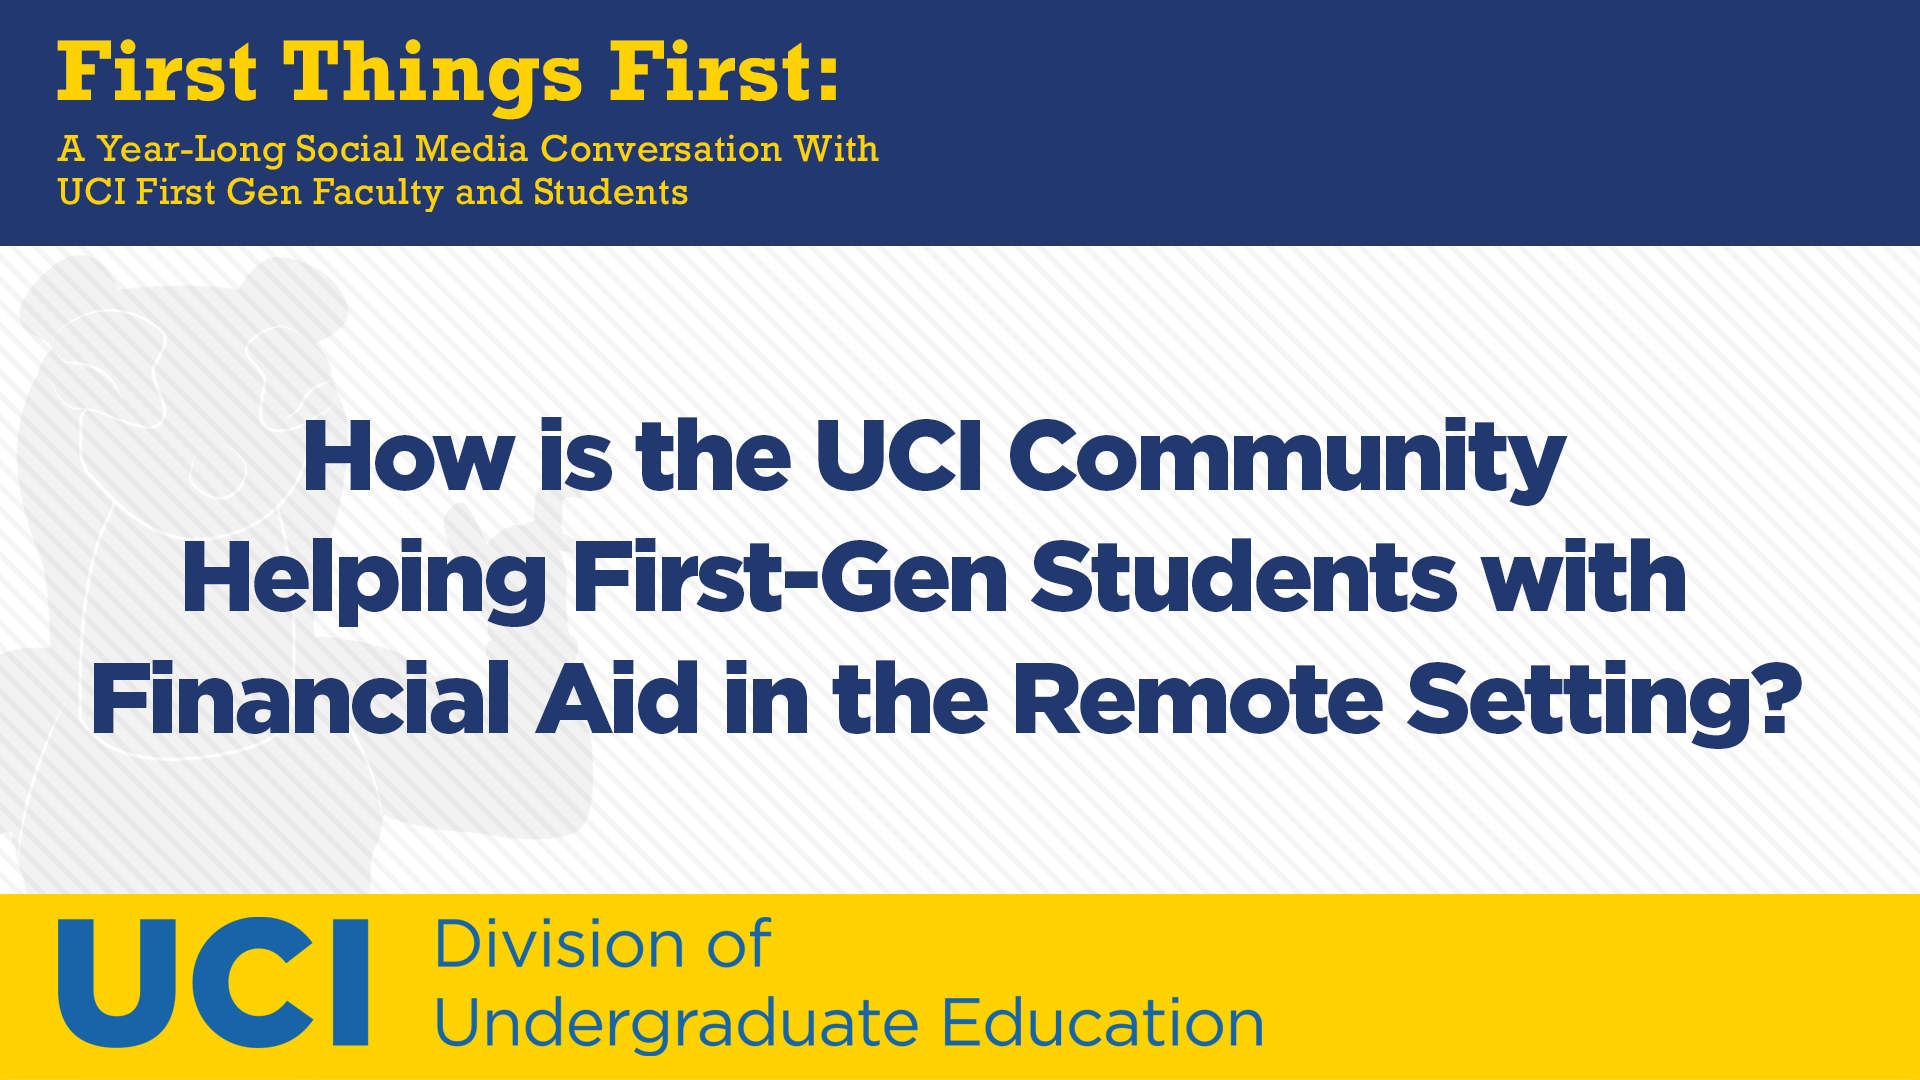 How is the UCI Community Helping First-Gen Students with Financial Aid in the Remote Setting?